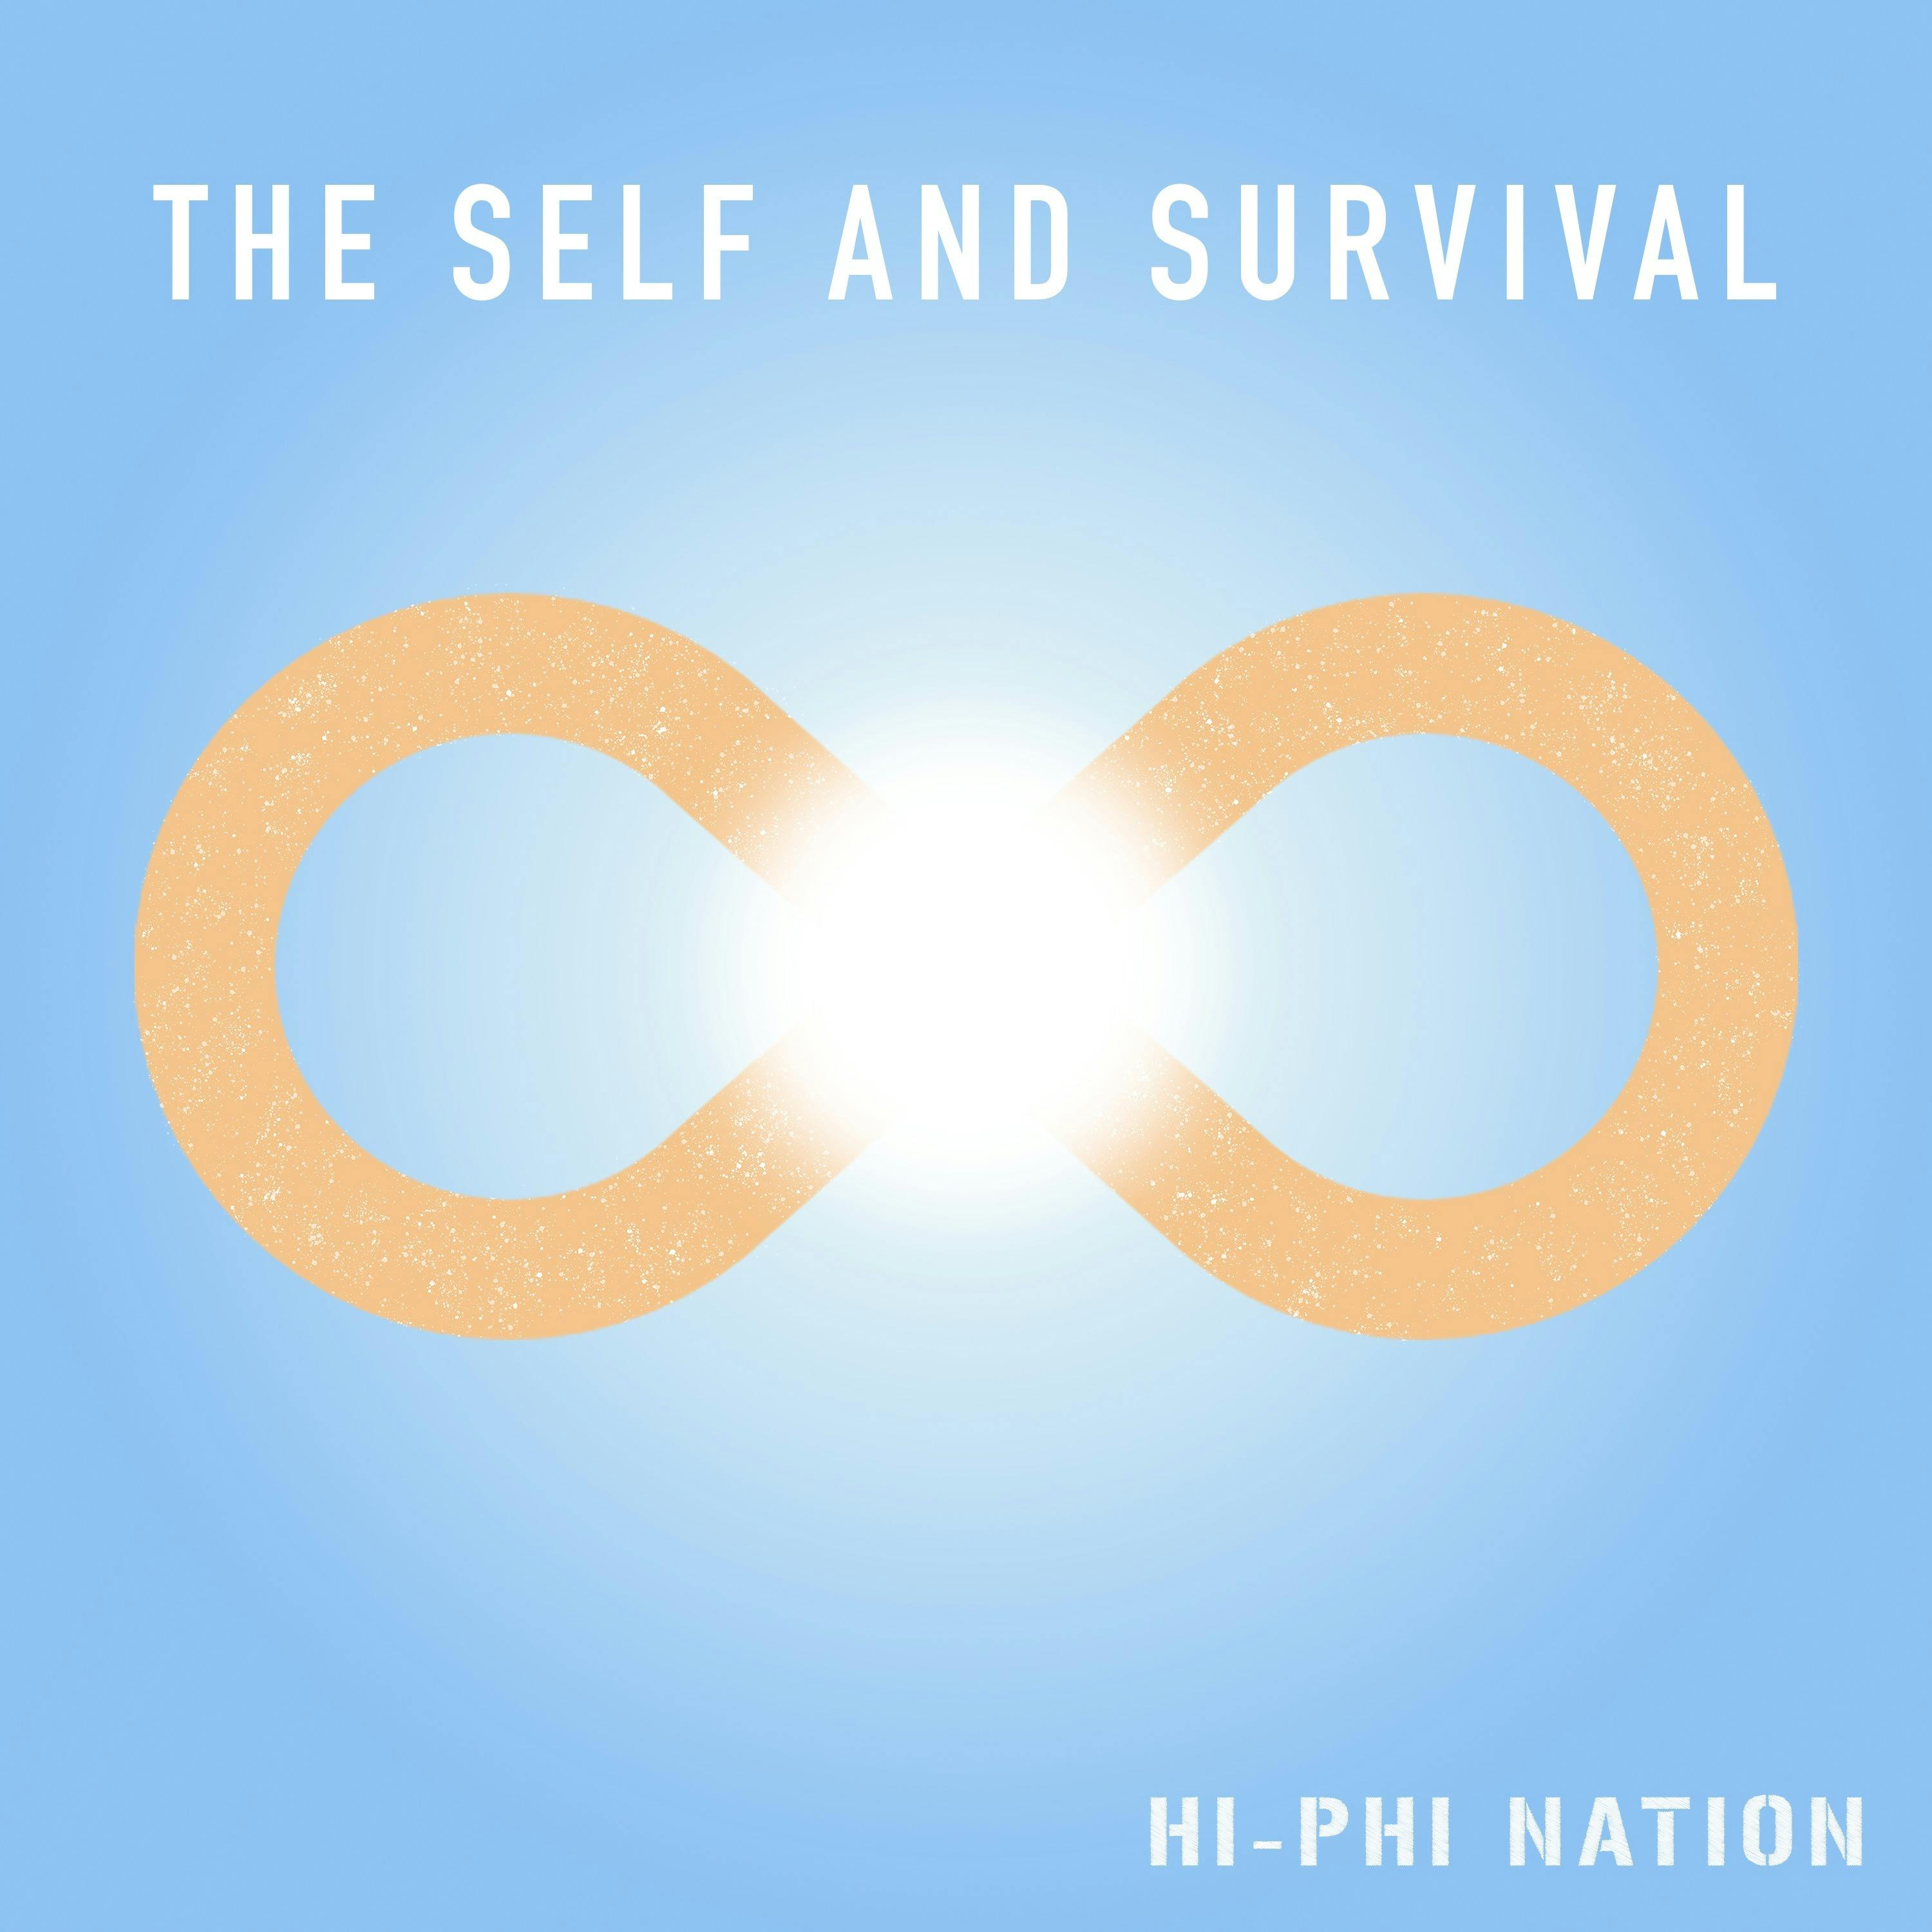 The Self and Survival